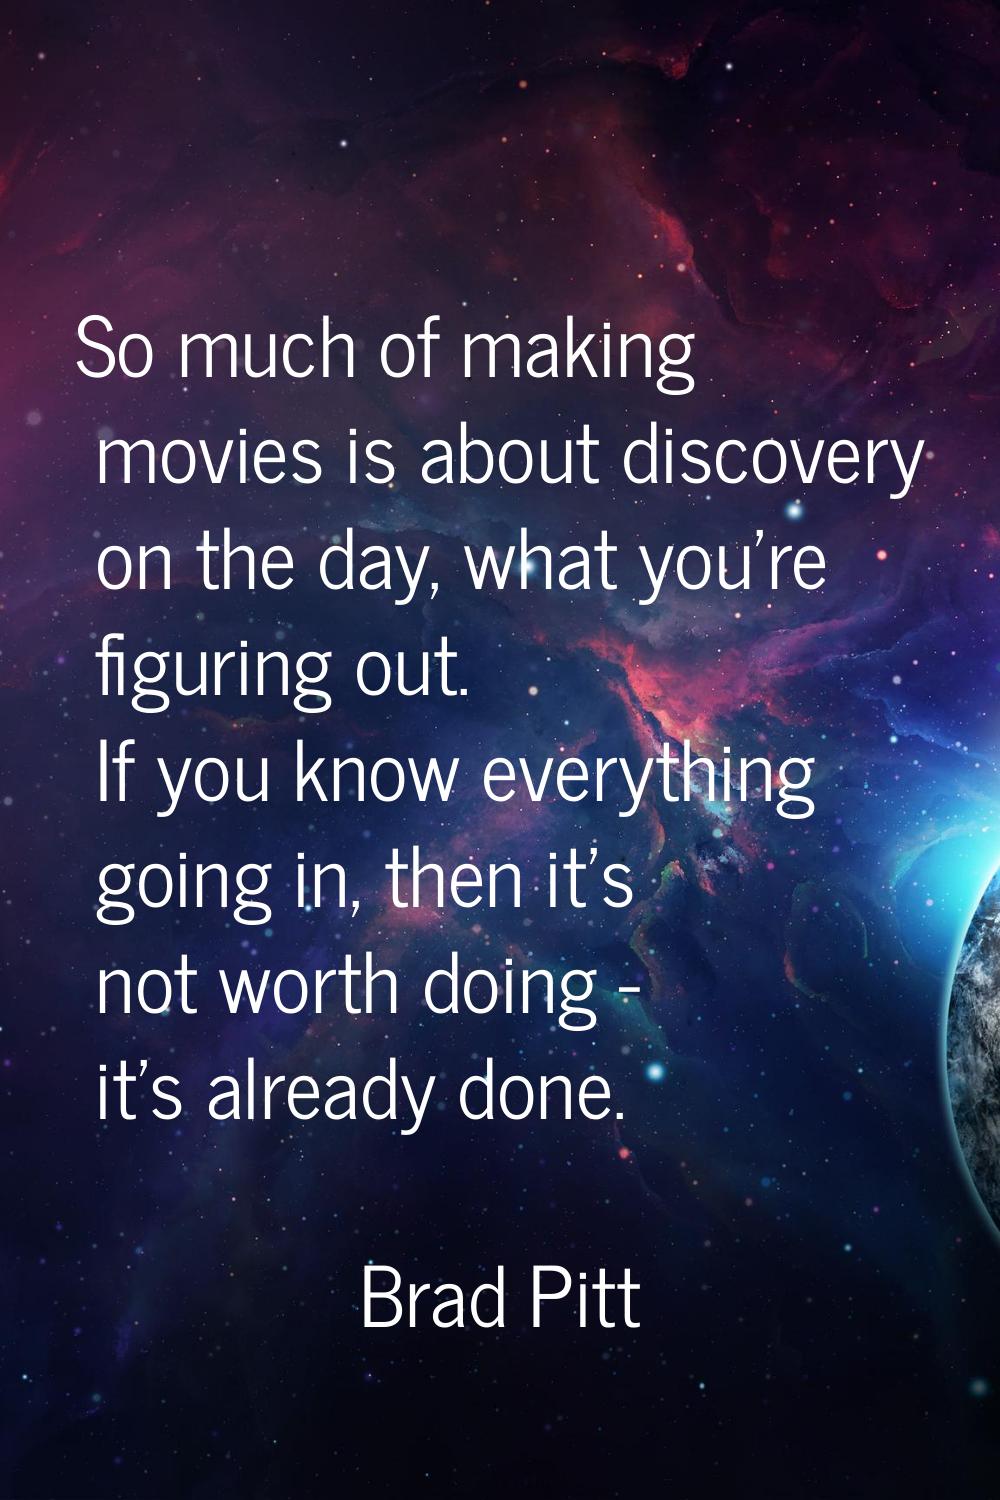 So much of making movies is about discovery on the day, what you're figuring out. If you know every